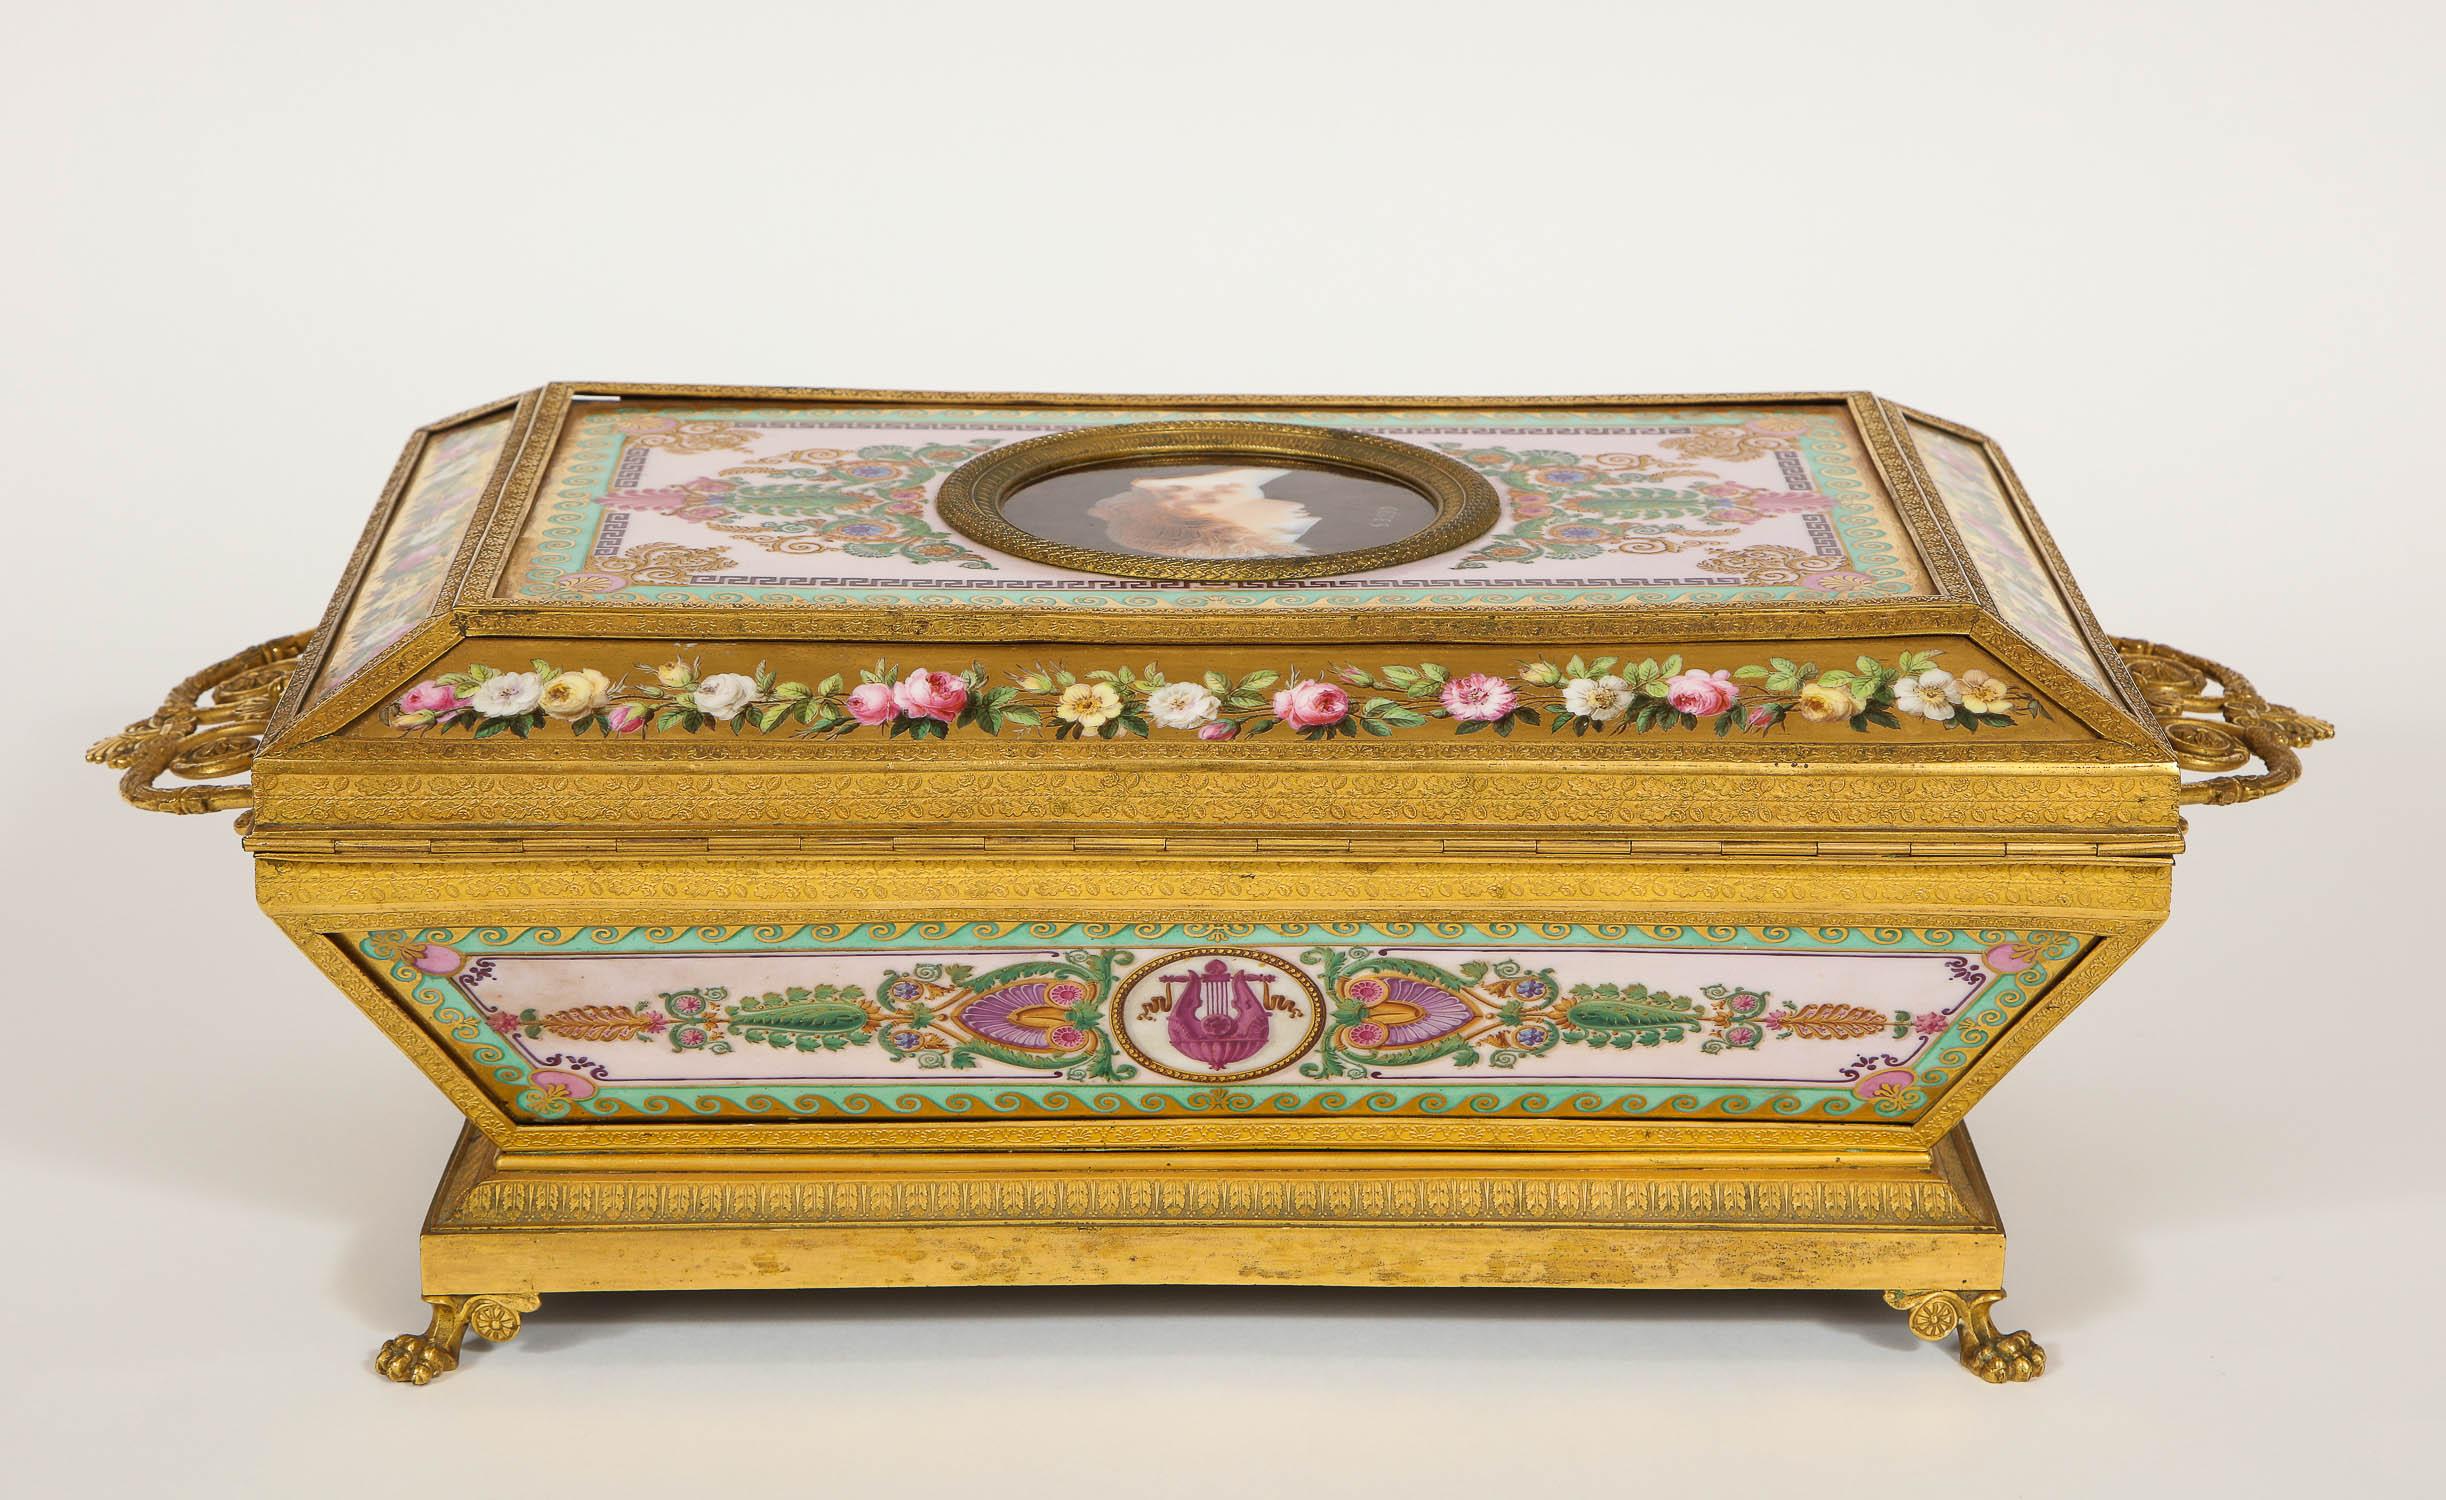 Early 19th Century Important Empire Period Paris Porcelain & Ormolu-Mounted Casket/Box/Jewelry Box For Sale